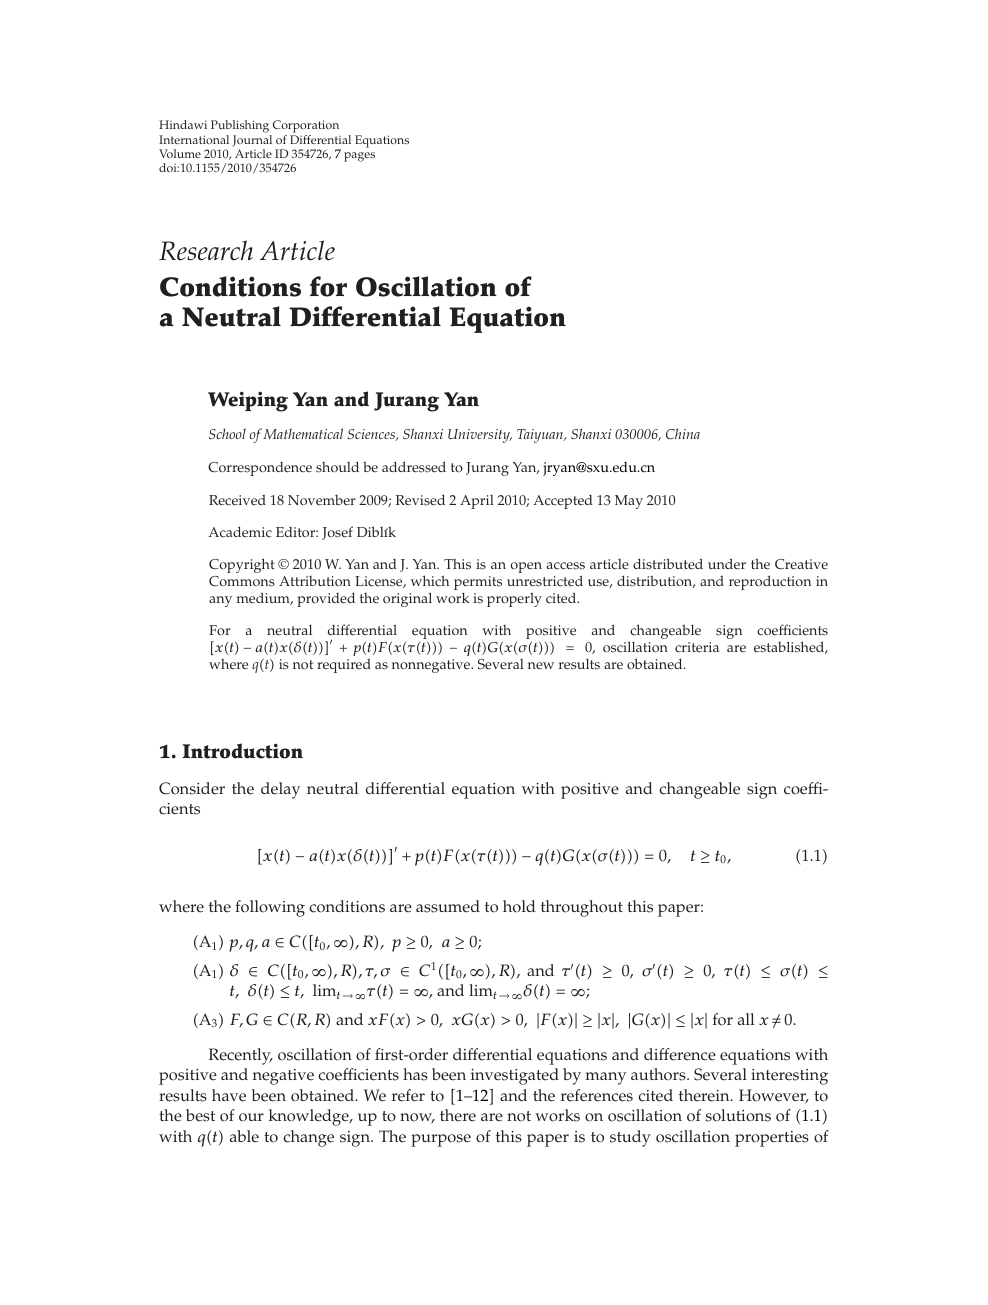 Conditions For Oscillation Of A Neutral Differential Equation Topic Of Research Paper In Mathematics Download Scholarly Article Pdf And Read For Free On Cyberleninka Open Science Hub